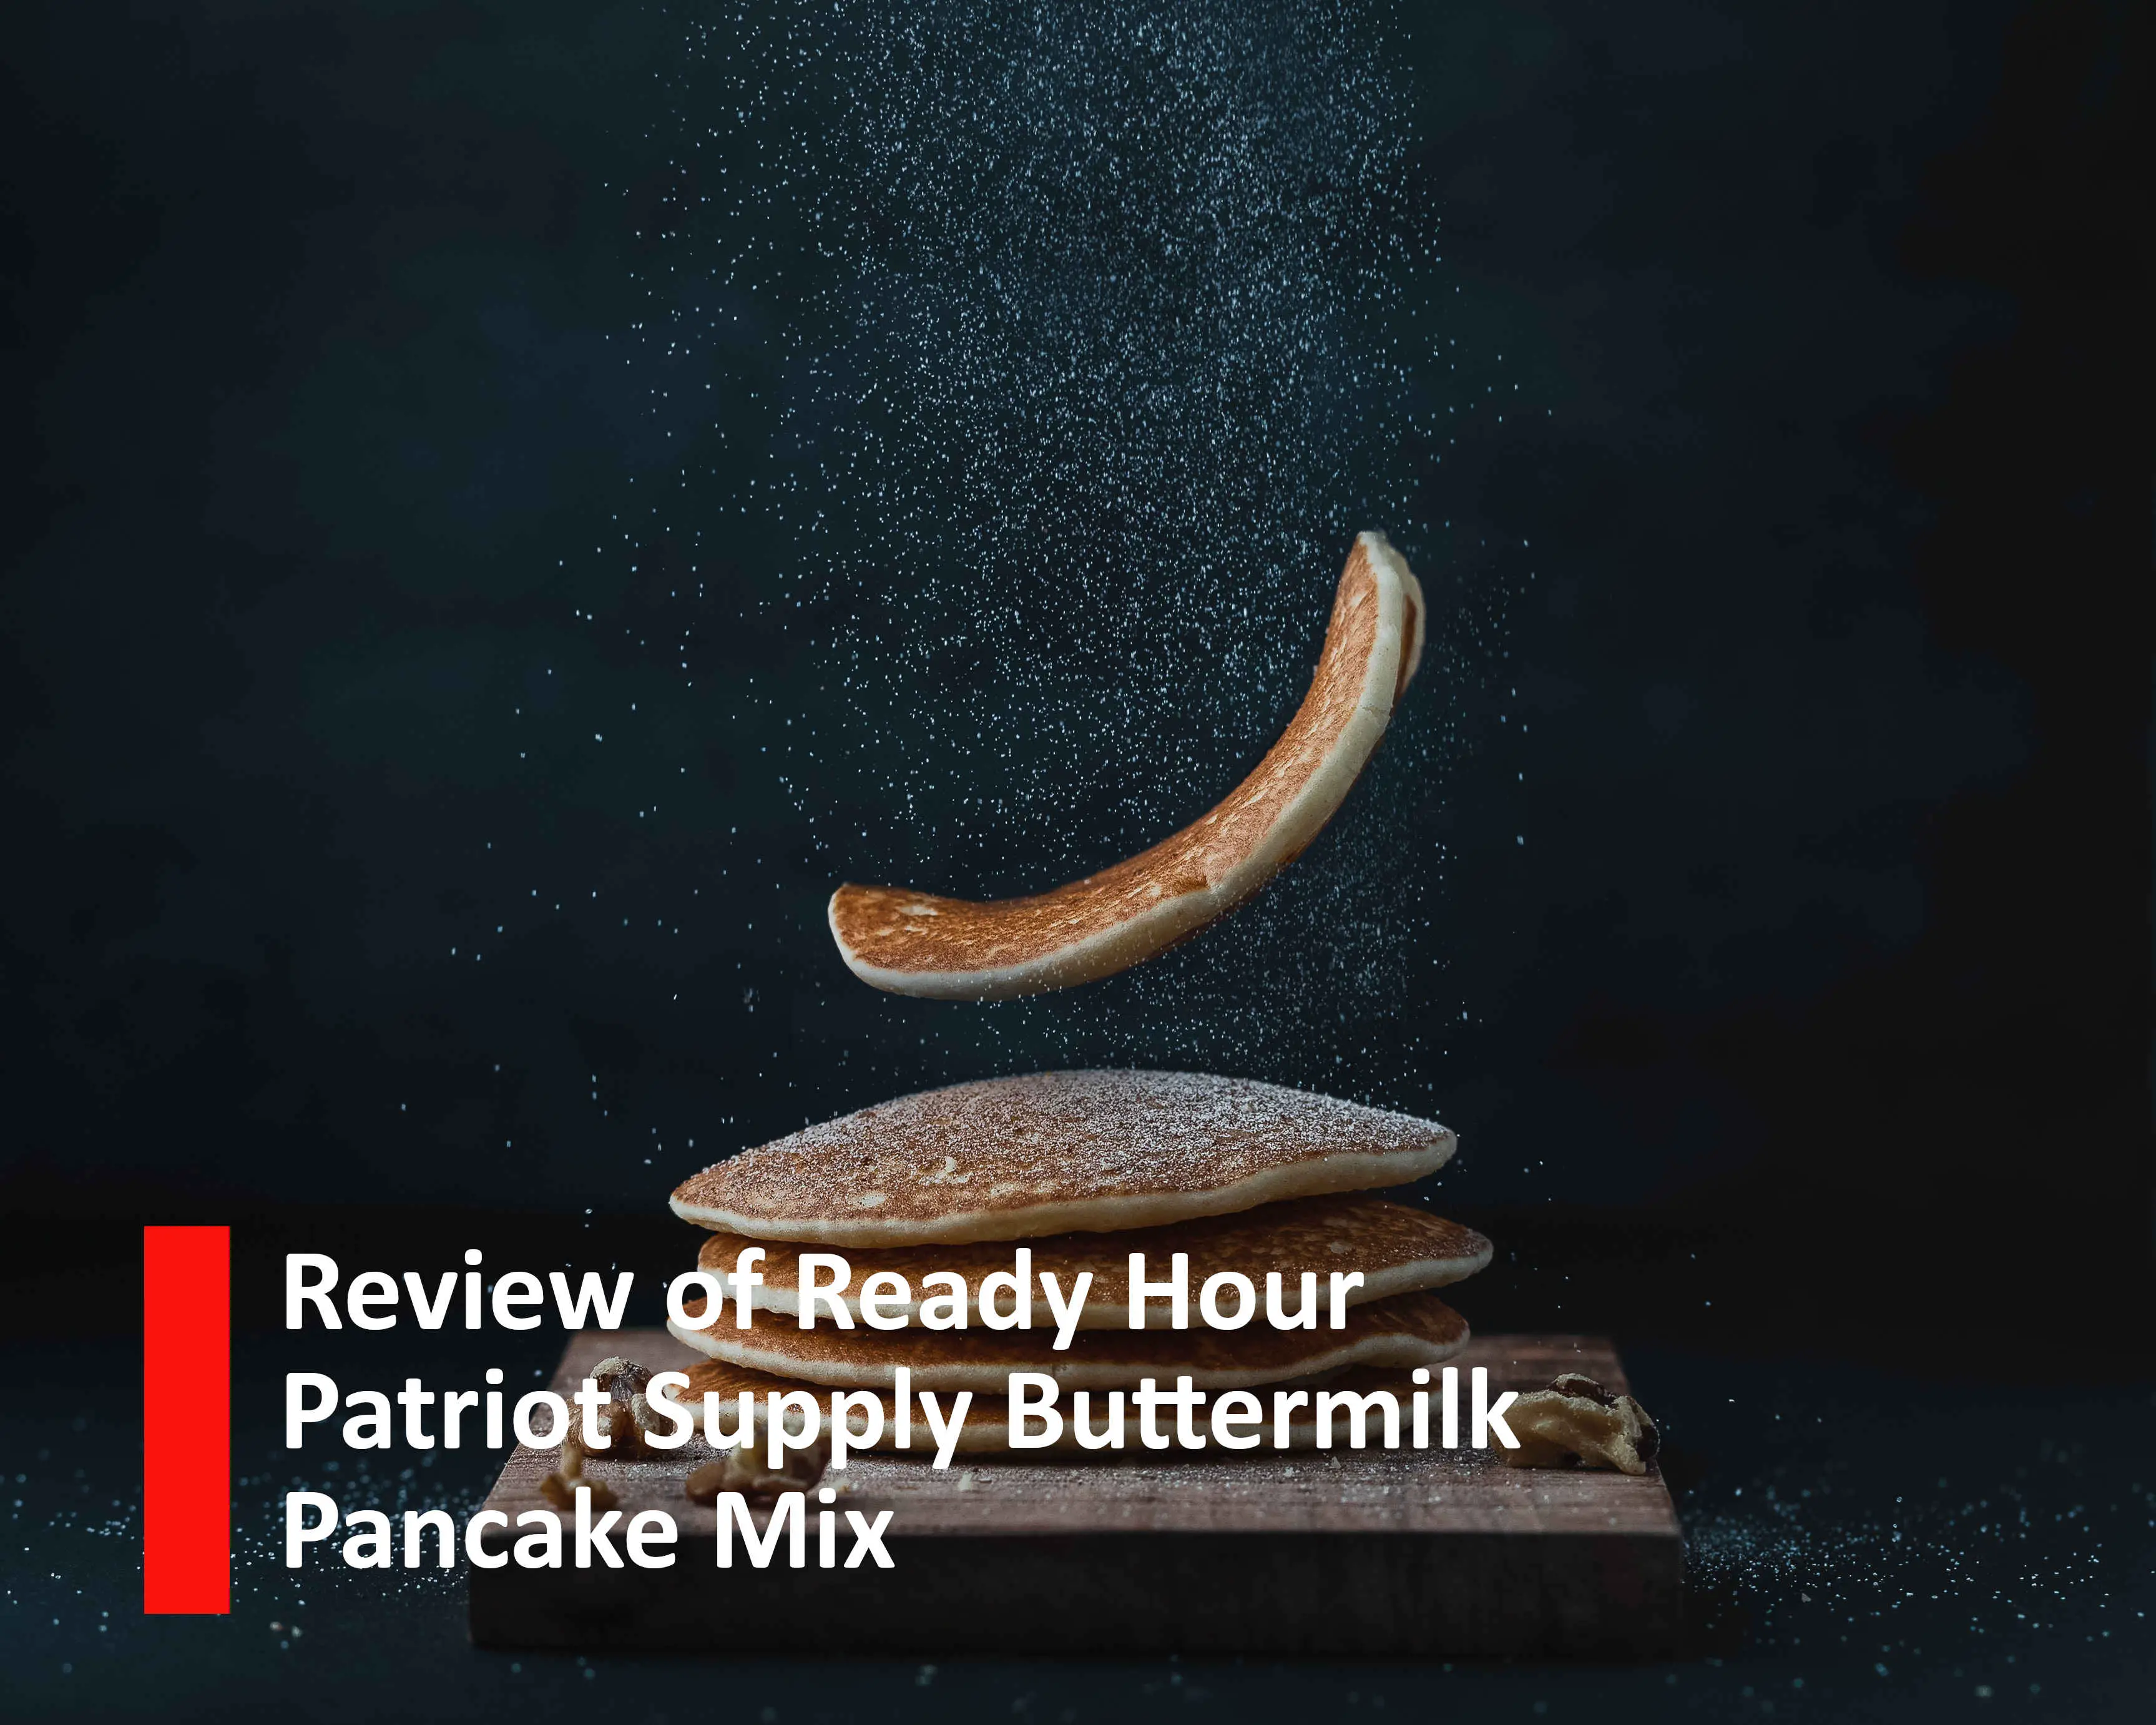 Review of Ready Hour Patriot Supply Buttermilk Pancakes